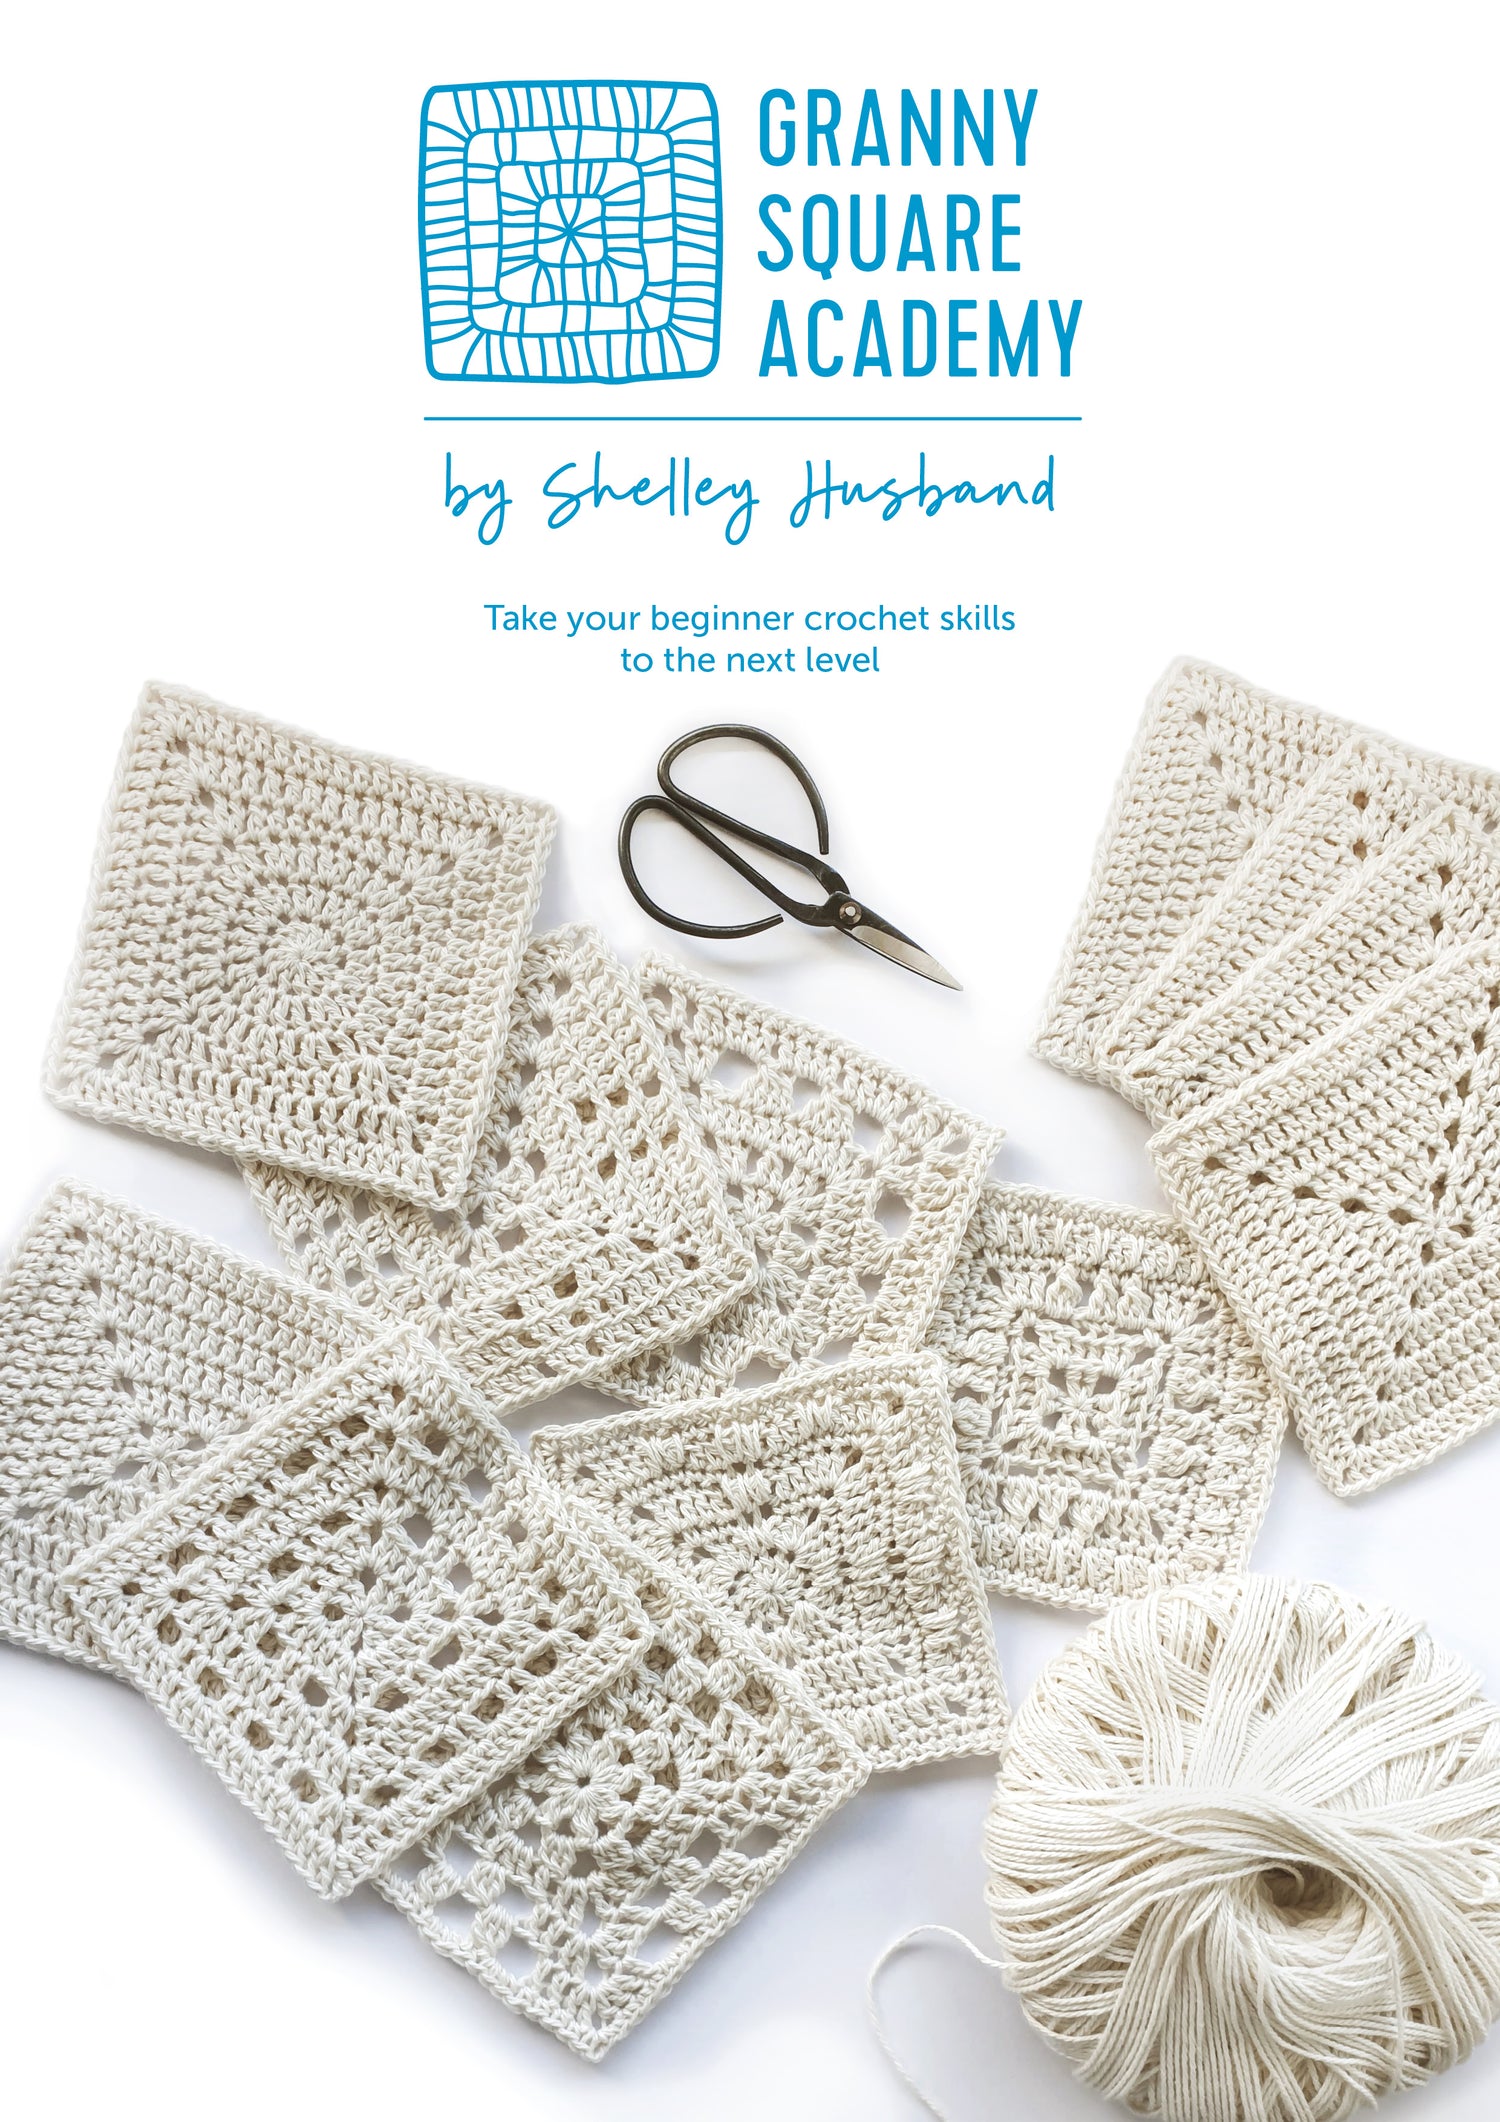 Granny Square Academy book by Shelley Husband full cover "Take your beginner crochet skills to the next level"